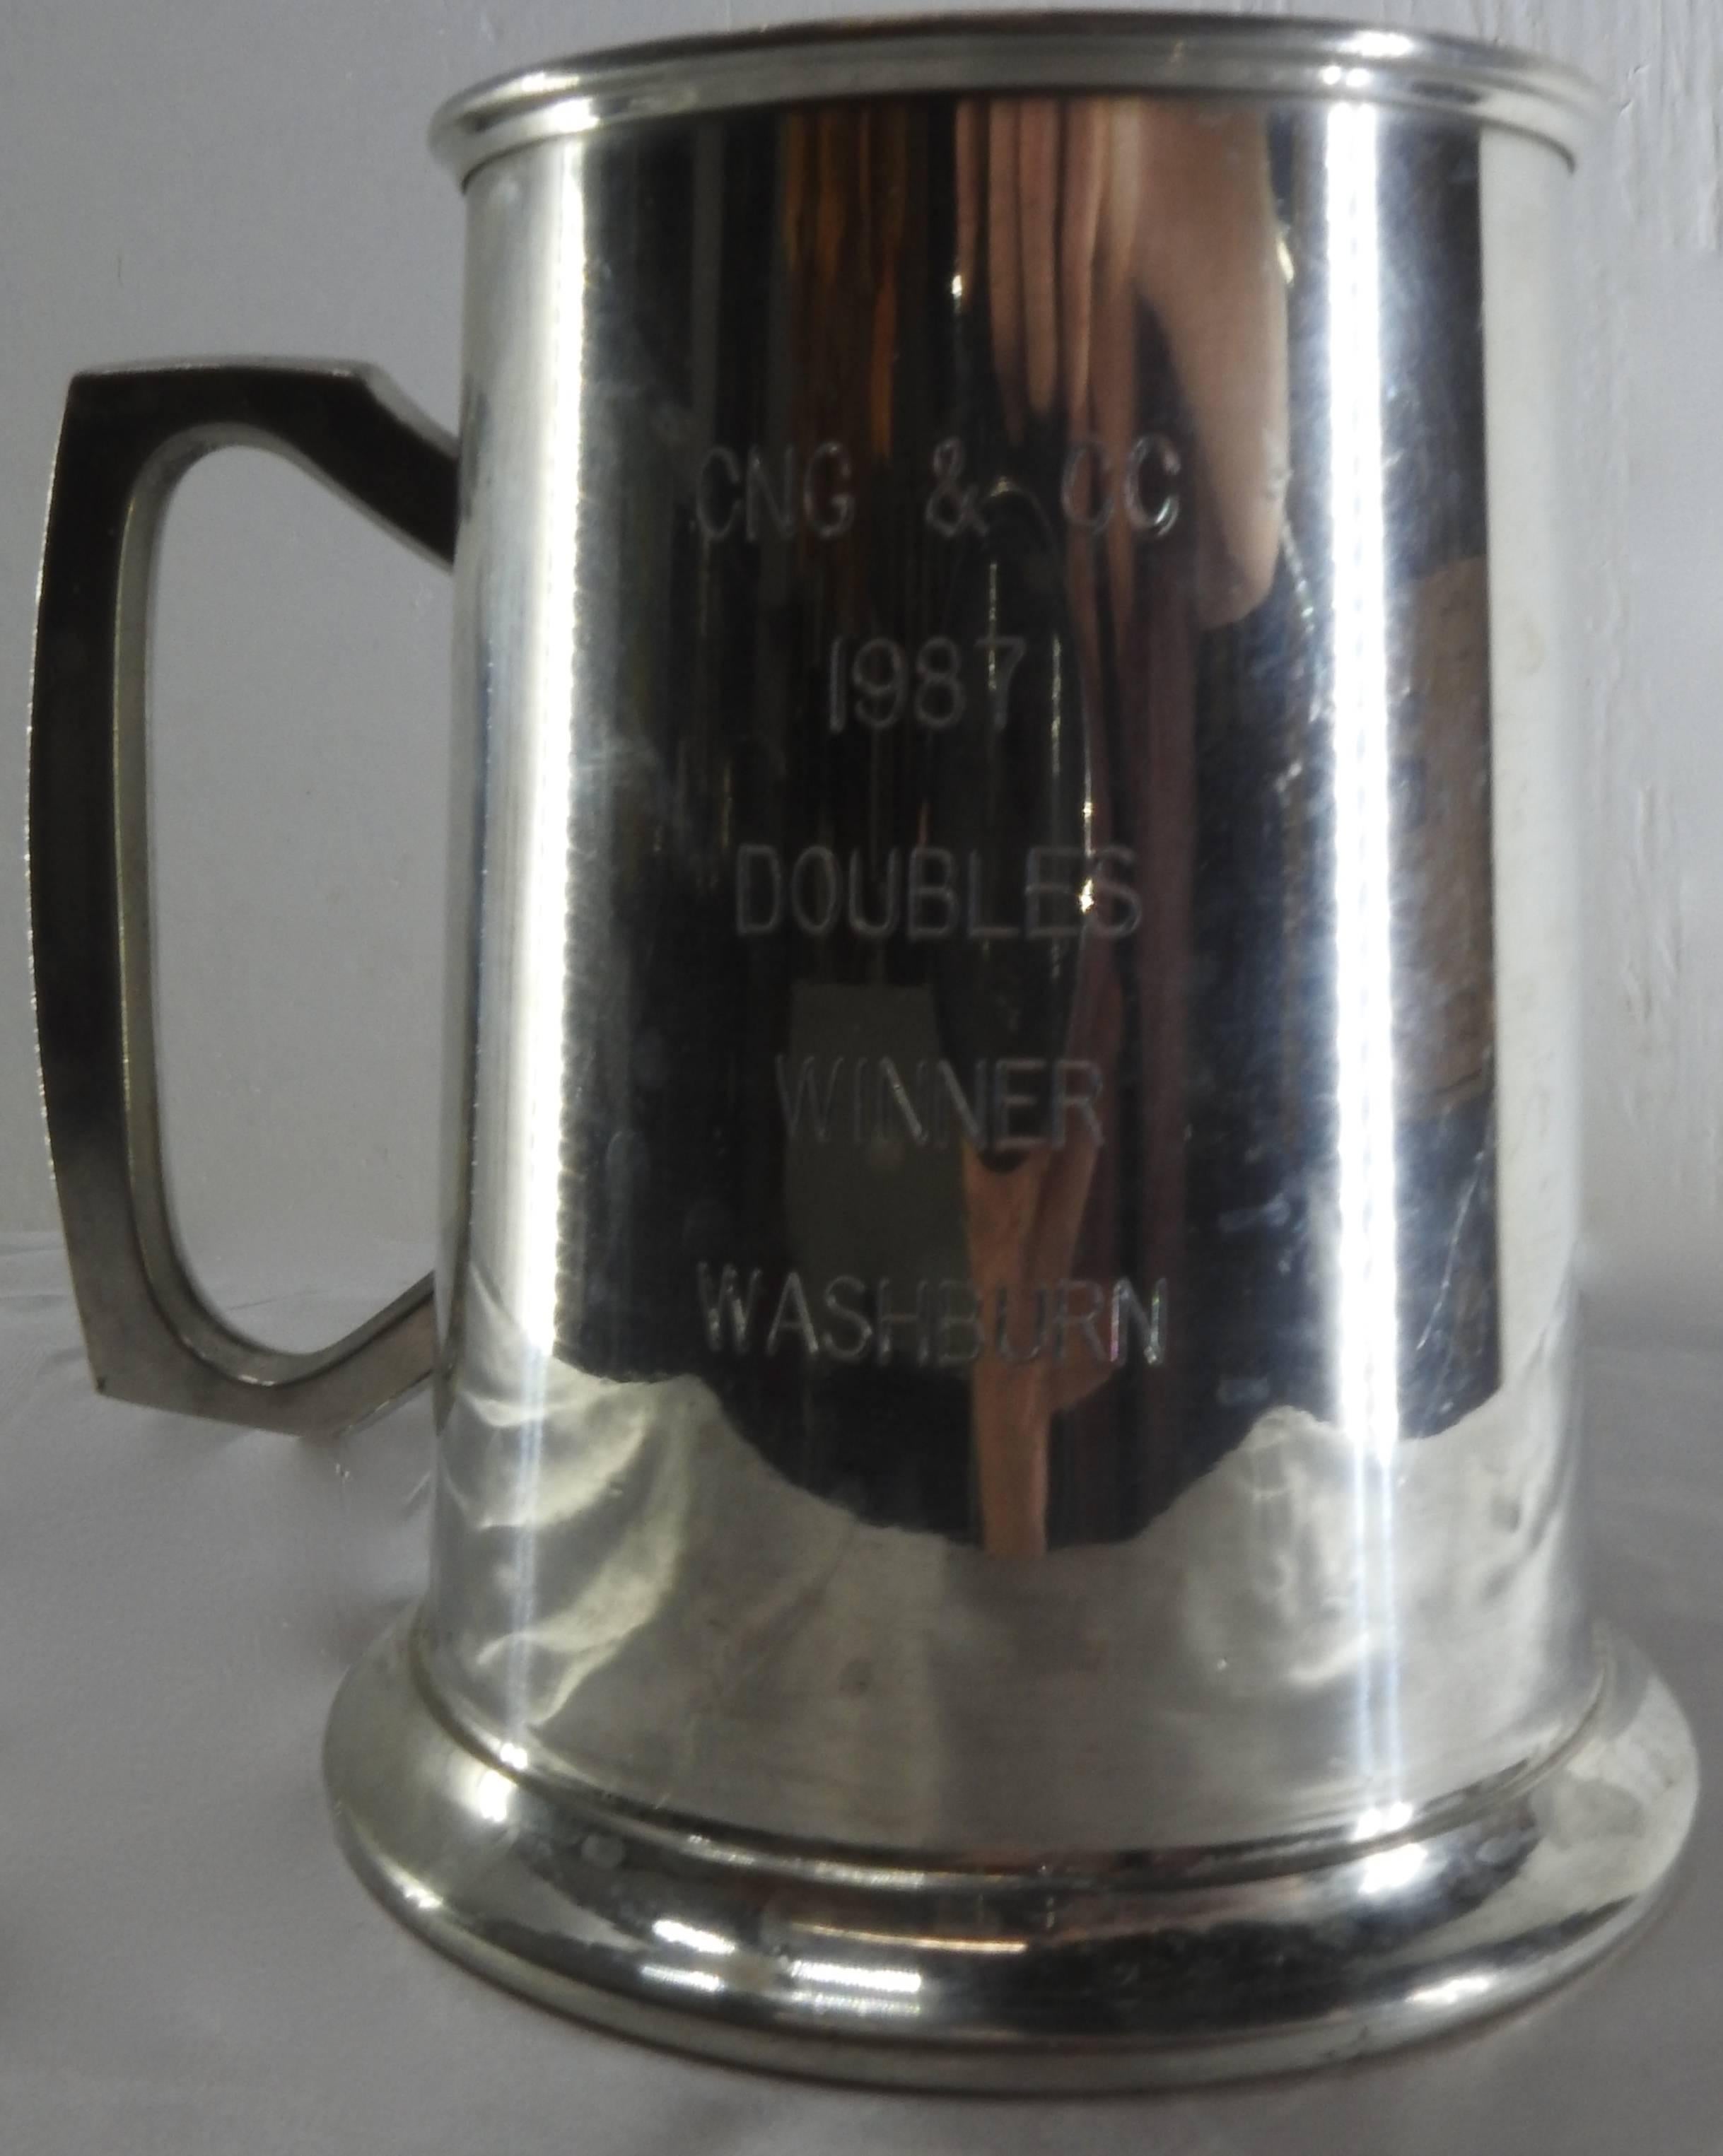 Featured is an engraved pewter tankard which was made in Bolivia. It has Classic lines formed in the pewter and the bottom is enclosed in glass. The engraving states CNG & Co., 1987, Doubles Winner, Washburn. The bottom is stamped genuine Pewter